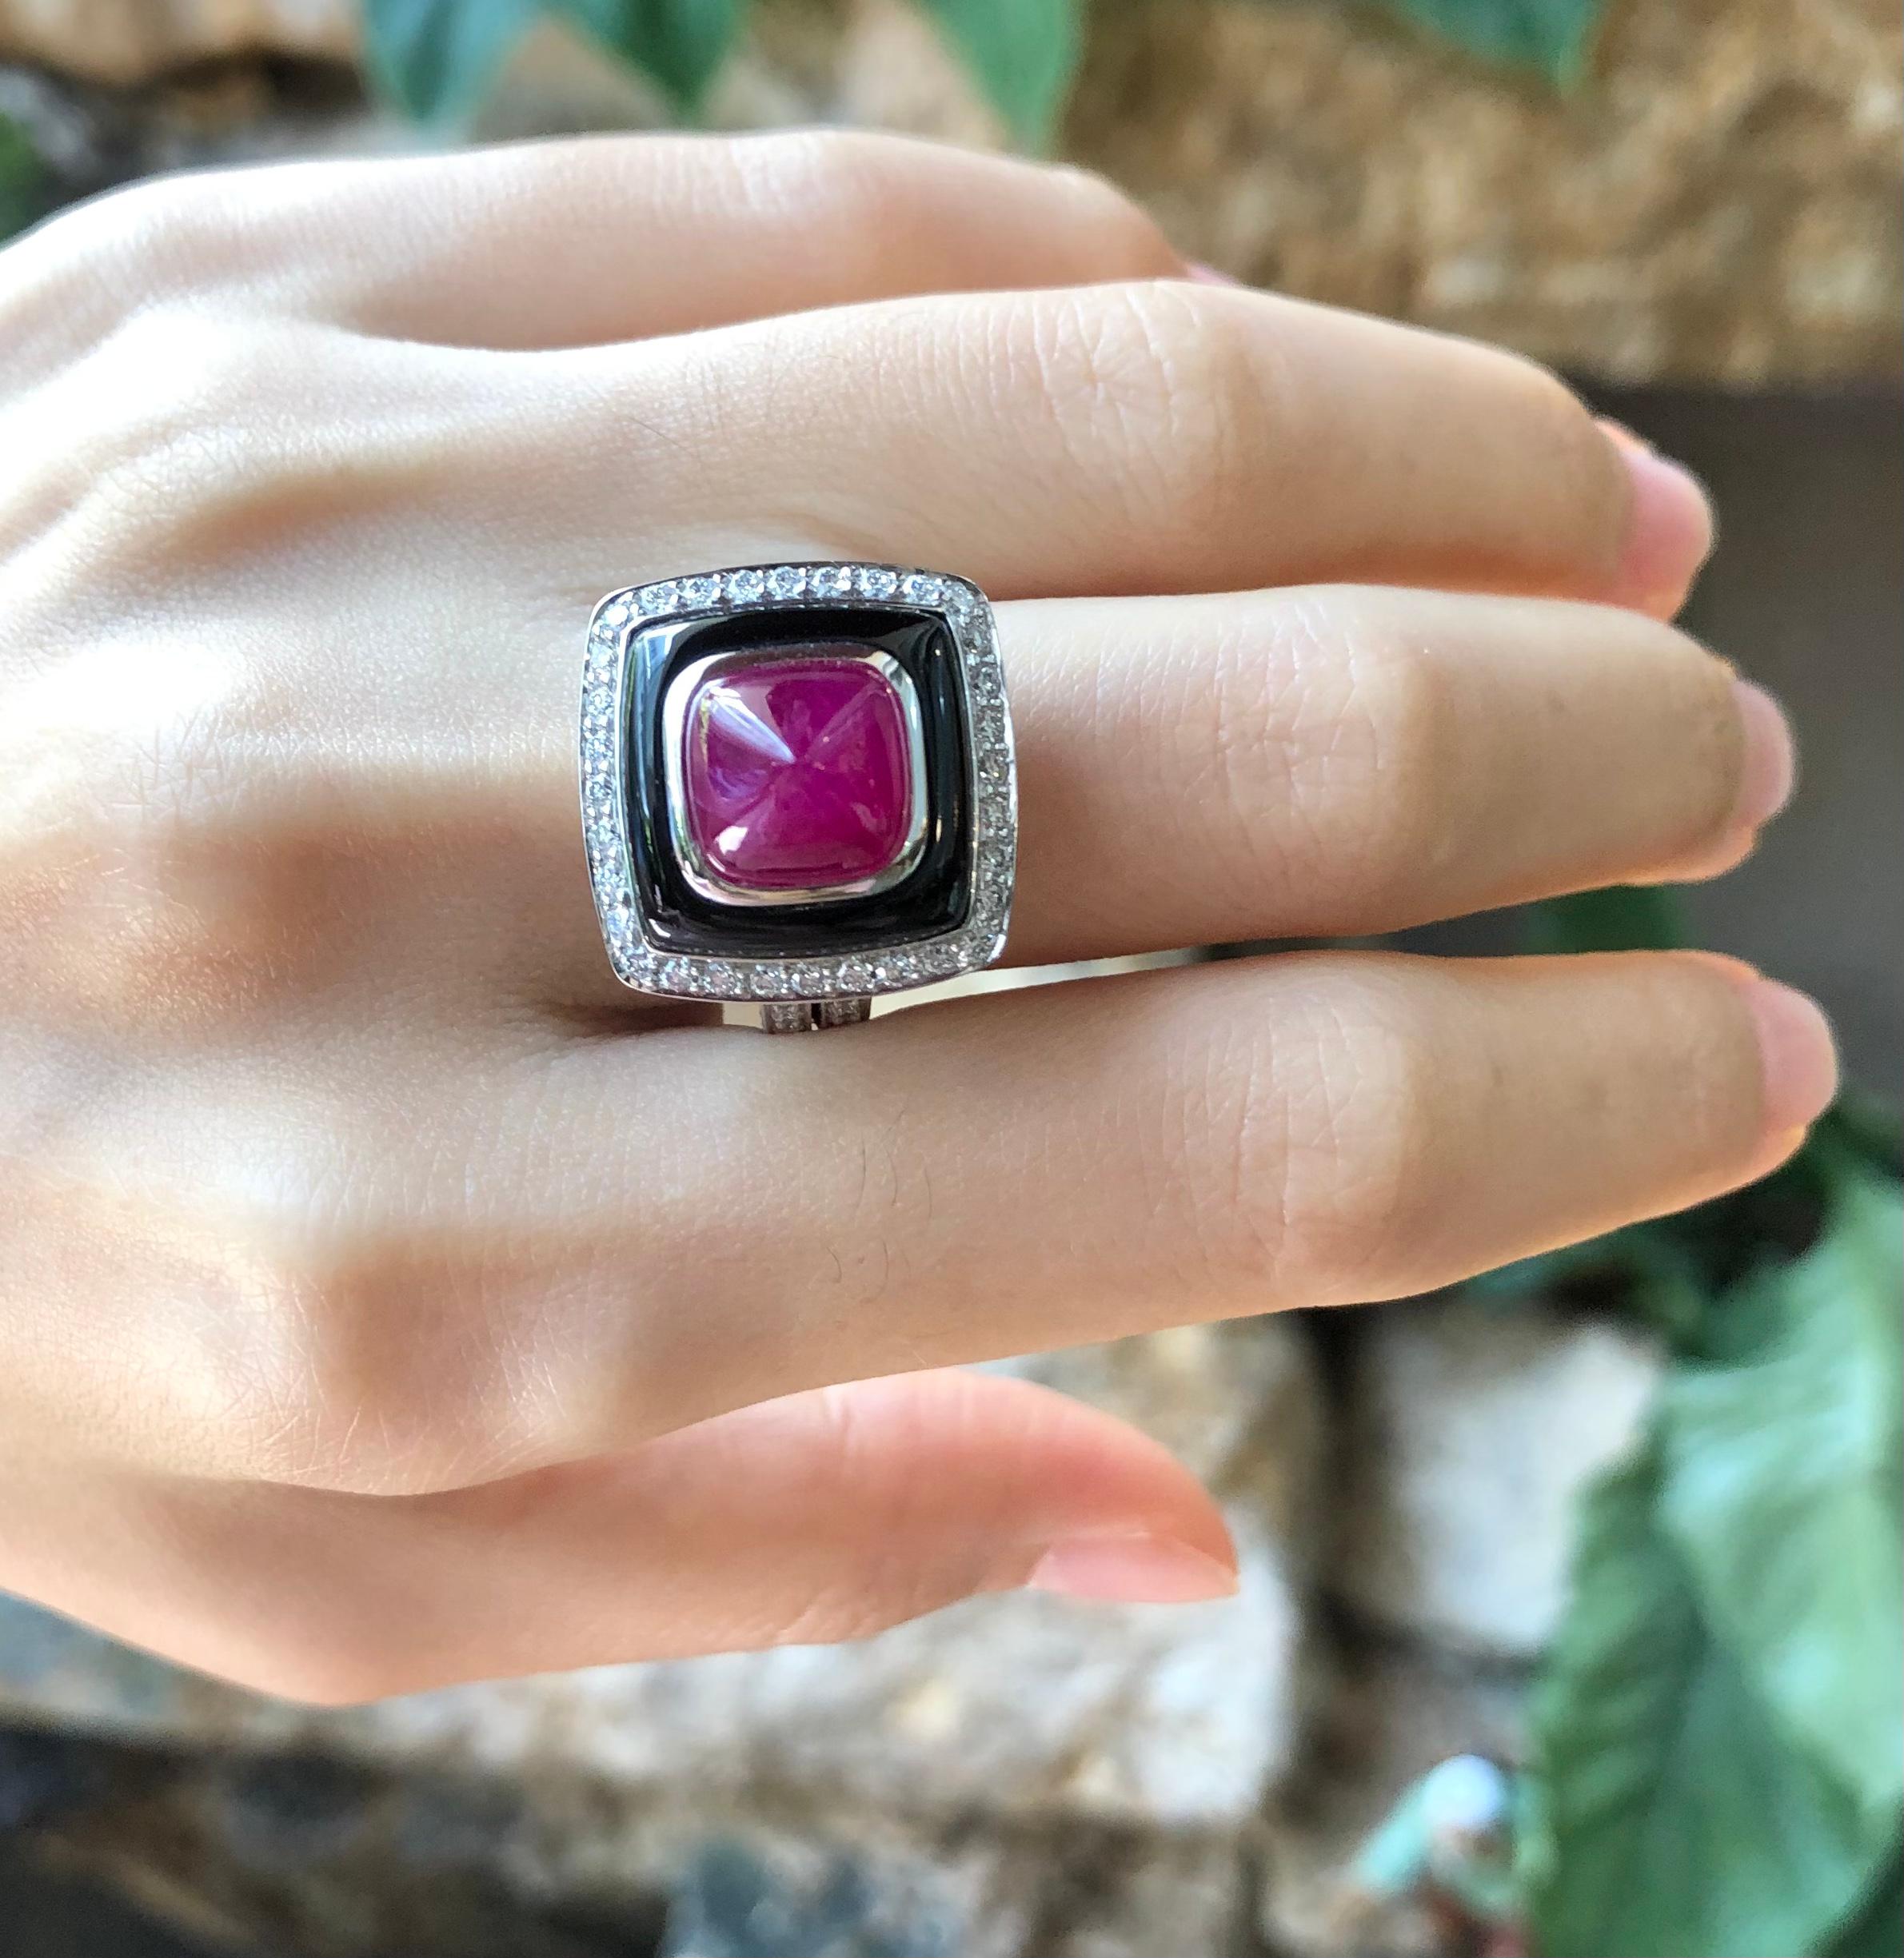 Cabochon Ruby 5.40 carats with Onyx and Diamond 1.61 carats Ring set in 18 Karat White Gold Settings

Width:  1.7 cm 
Length:  1.7 cm
Ring Size: 52
Total Weight: 16.57 grams

